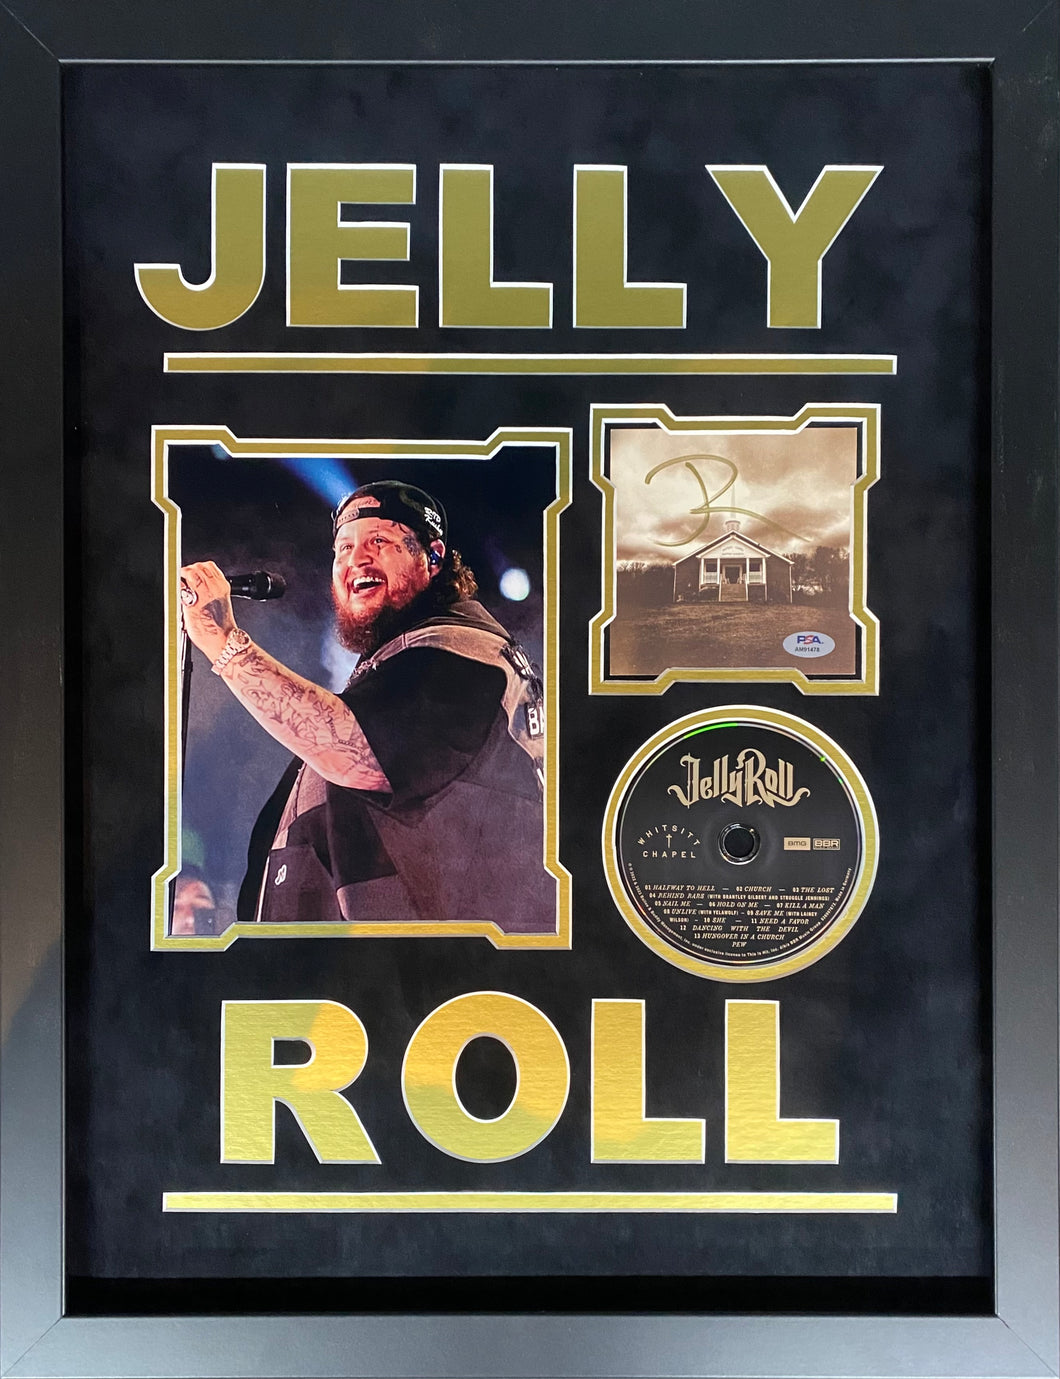 Jelly Roll Custom Signed Collage with Photo, CD, and Insert Framed & Suede Matted with PSA COA